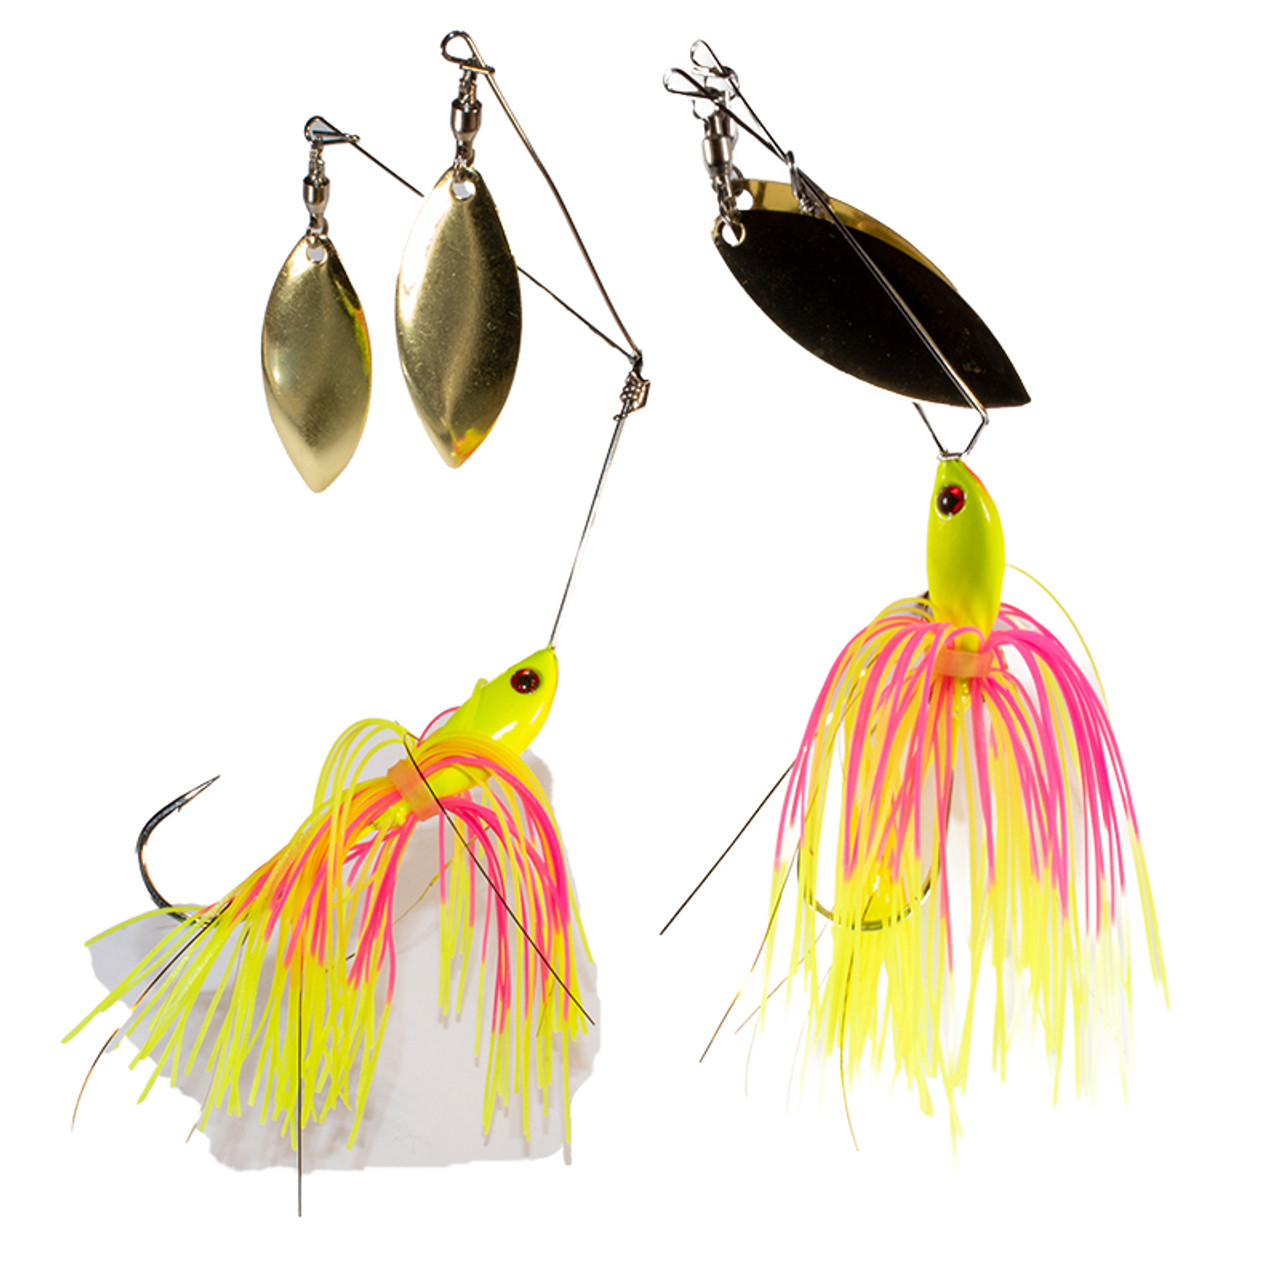 TWIN SPIN SPINNER BAIT 1oz 29g FISHING LURES COD PERCH BASS MADE